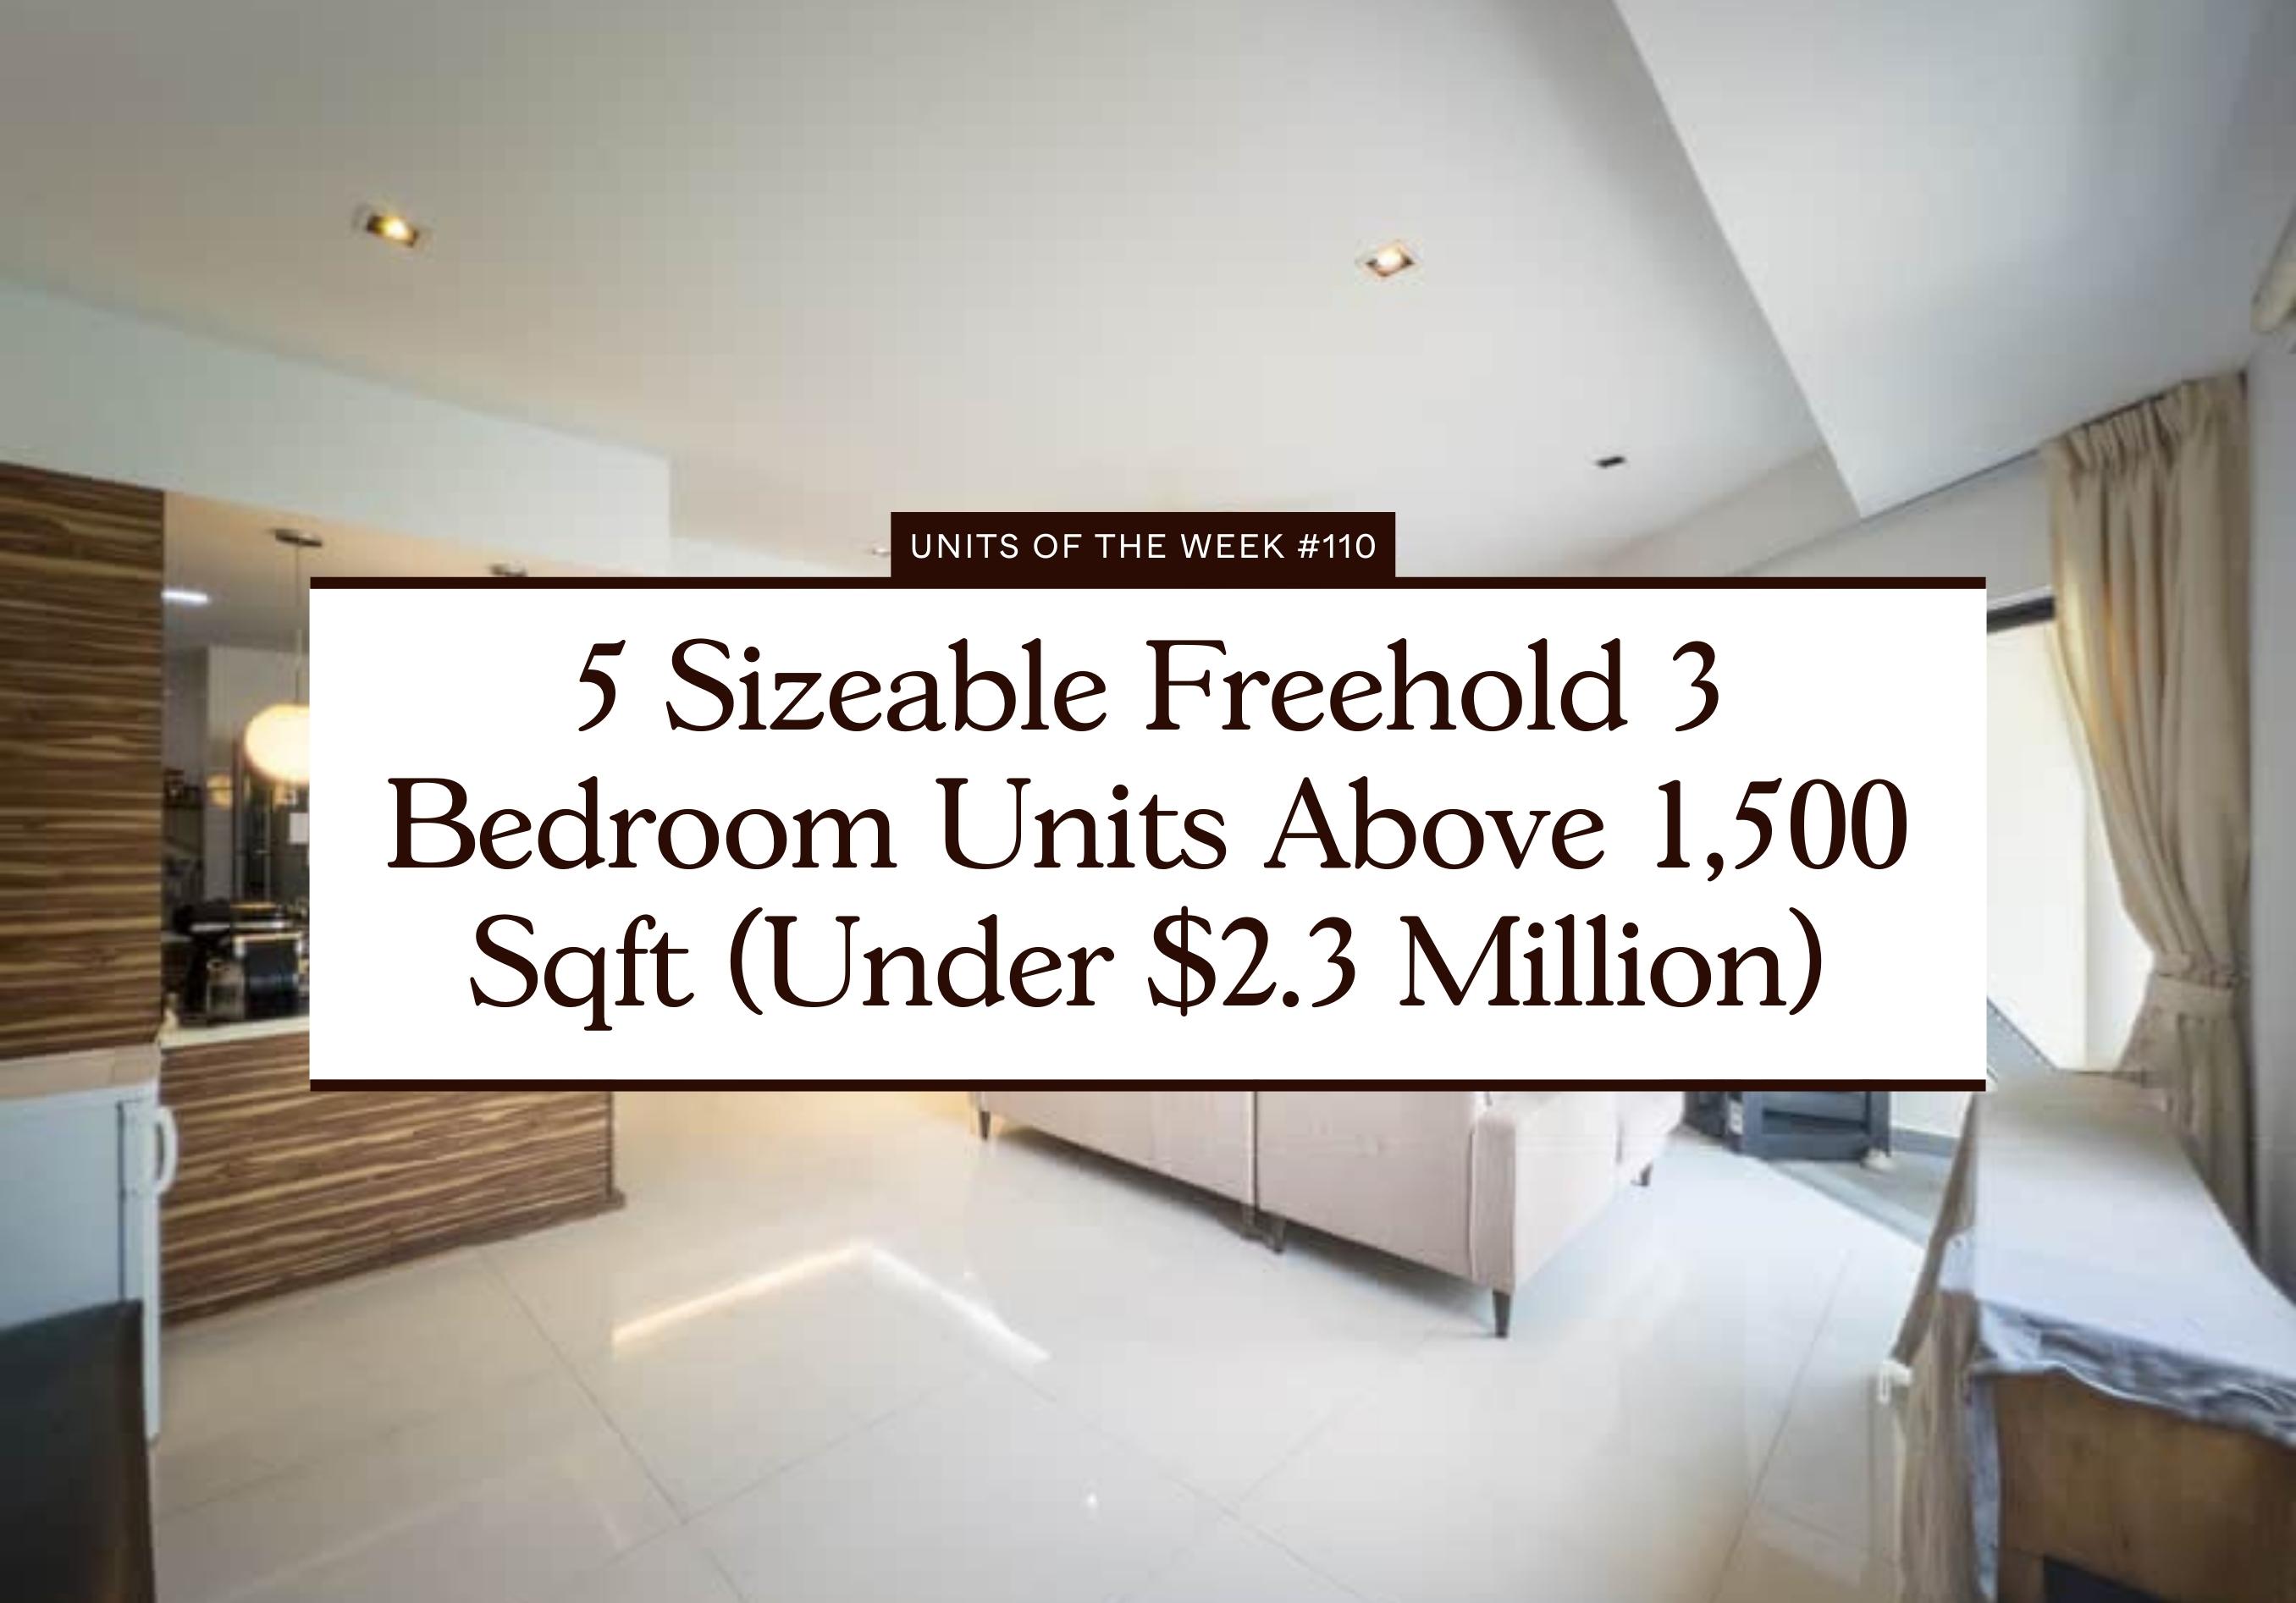 5 Sizeable Freehold 3 Bedroom Units Above 1500 Sqft Under 2.3 Million